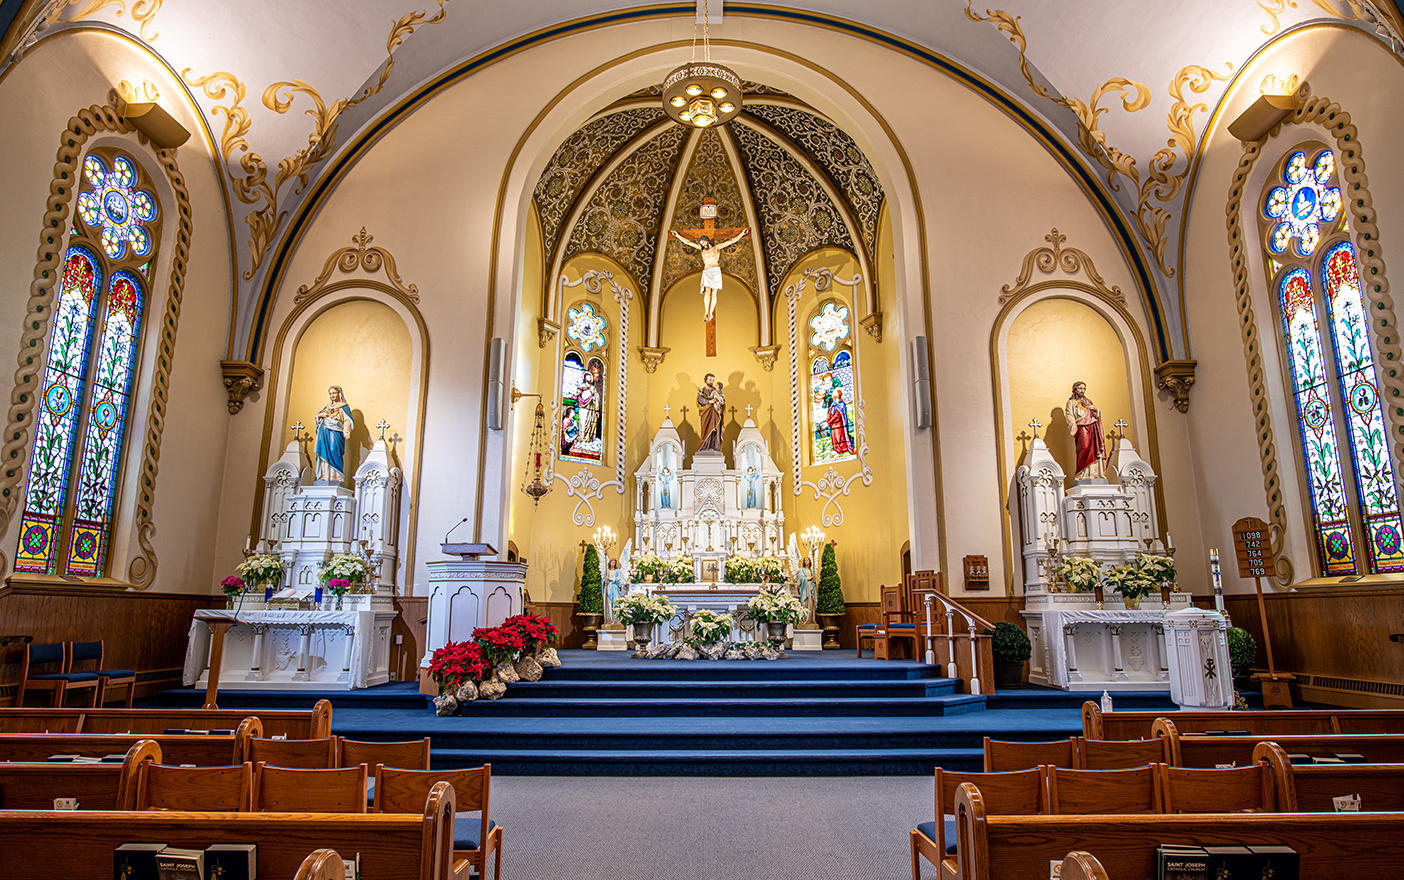 A picture of the interior of St. Joseph Catholic Church.